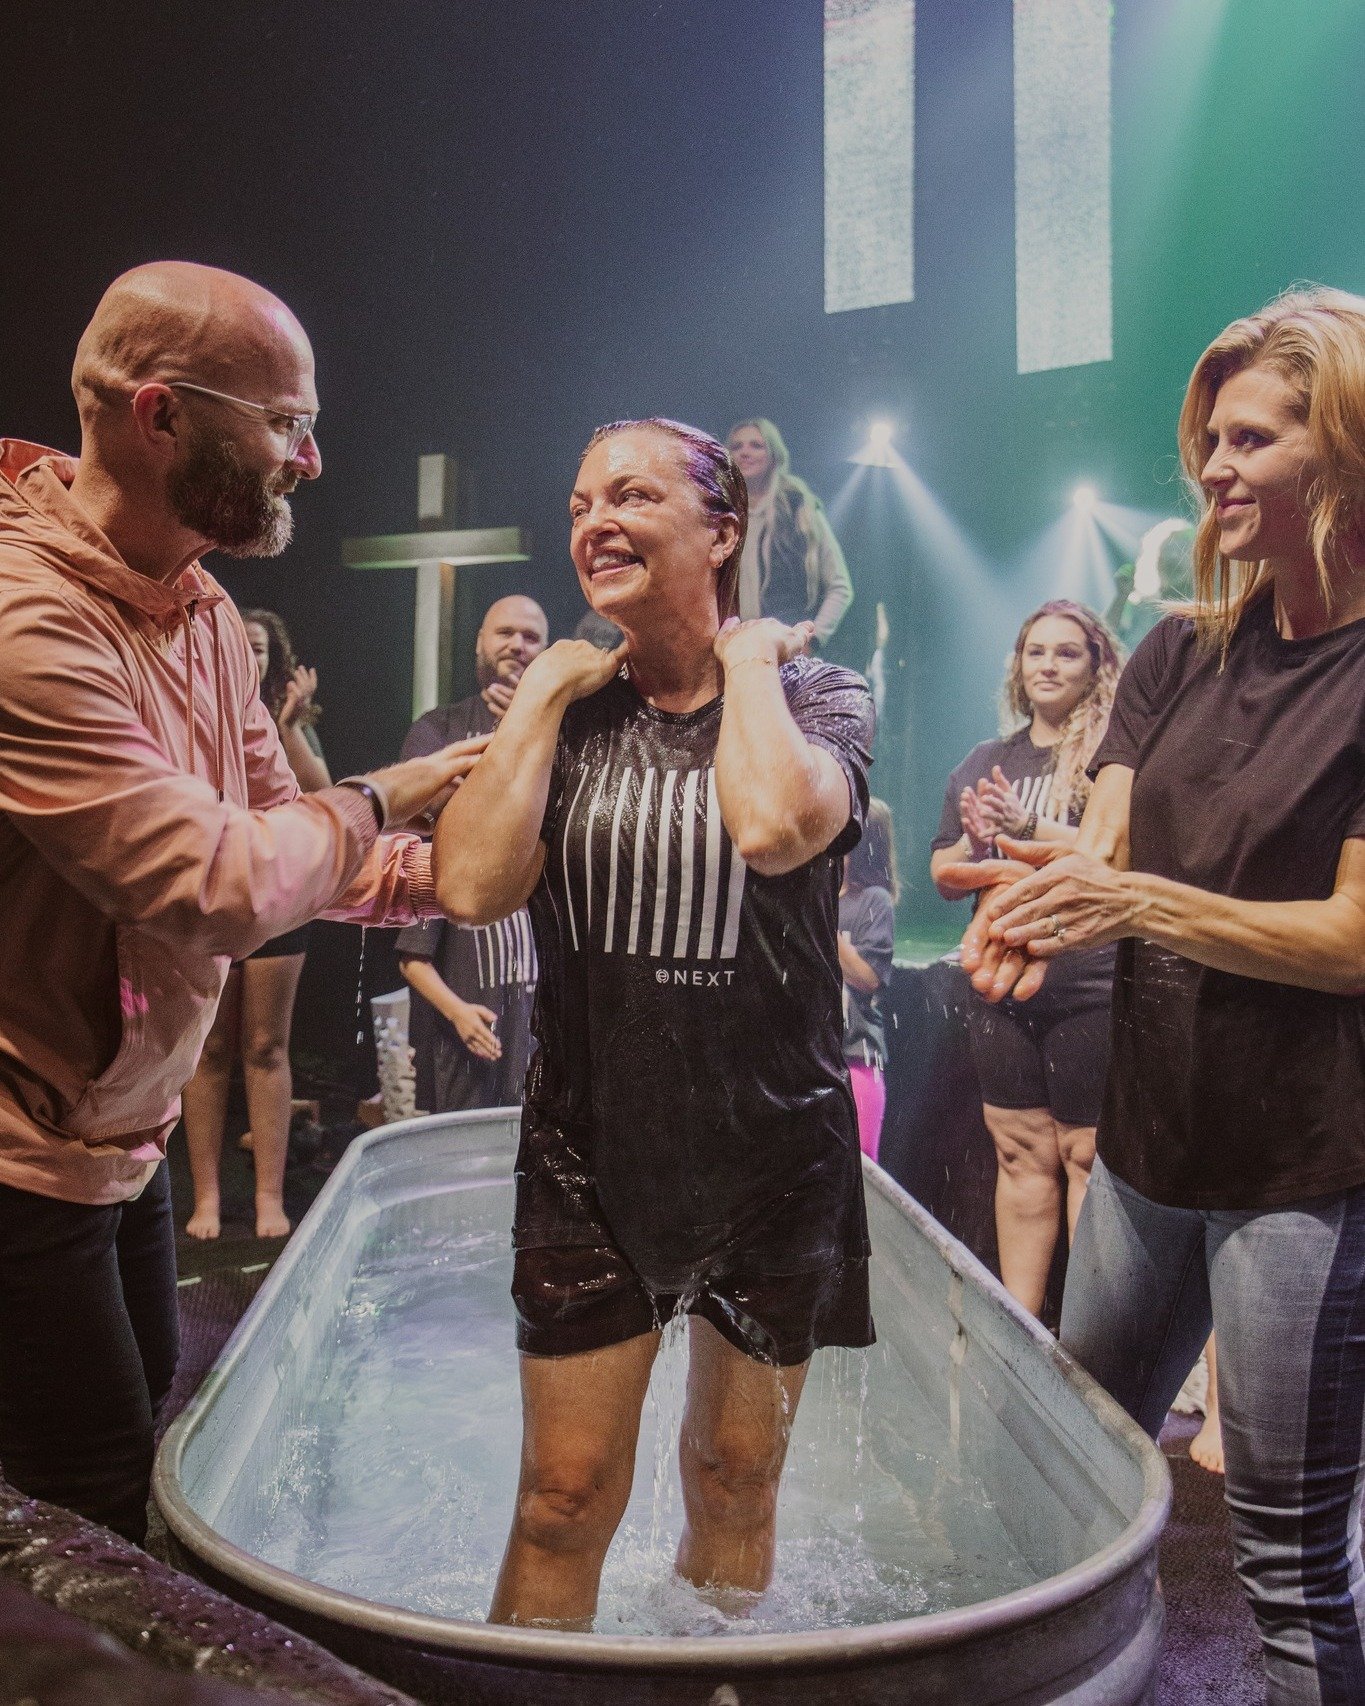 Tomorrow is Baptism Sunday and it's not too late 🙌 

Just head to iamembrace.com/baptism to get signed up. It's going to be an amazing Sunday!